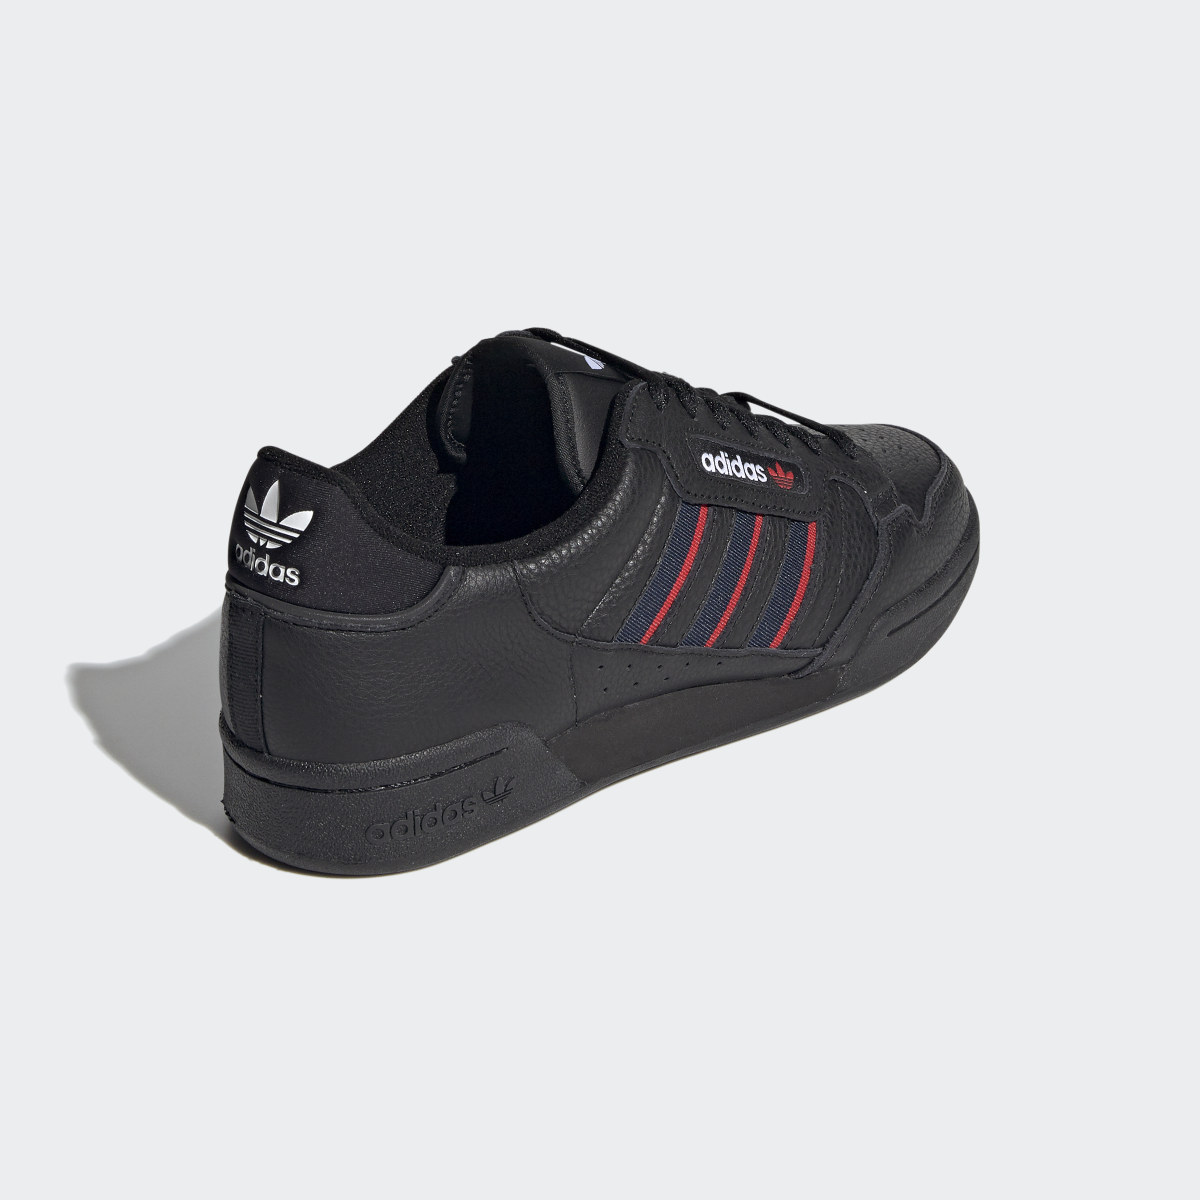 Adidas Continental 80 Stripes Shoes. 6